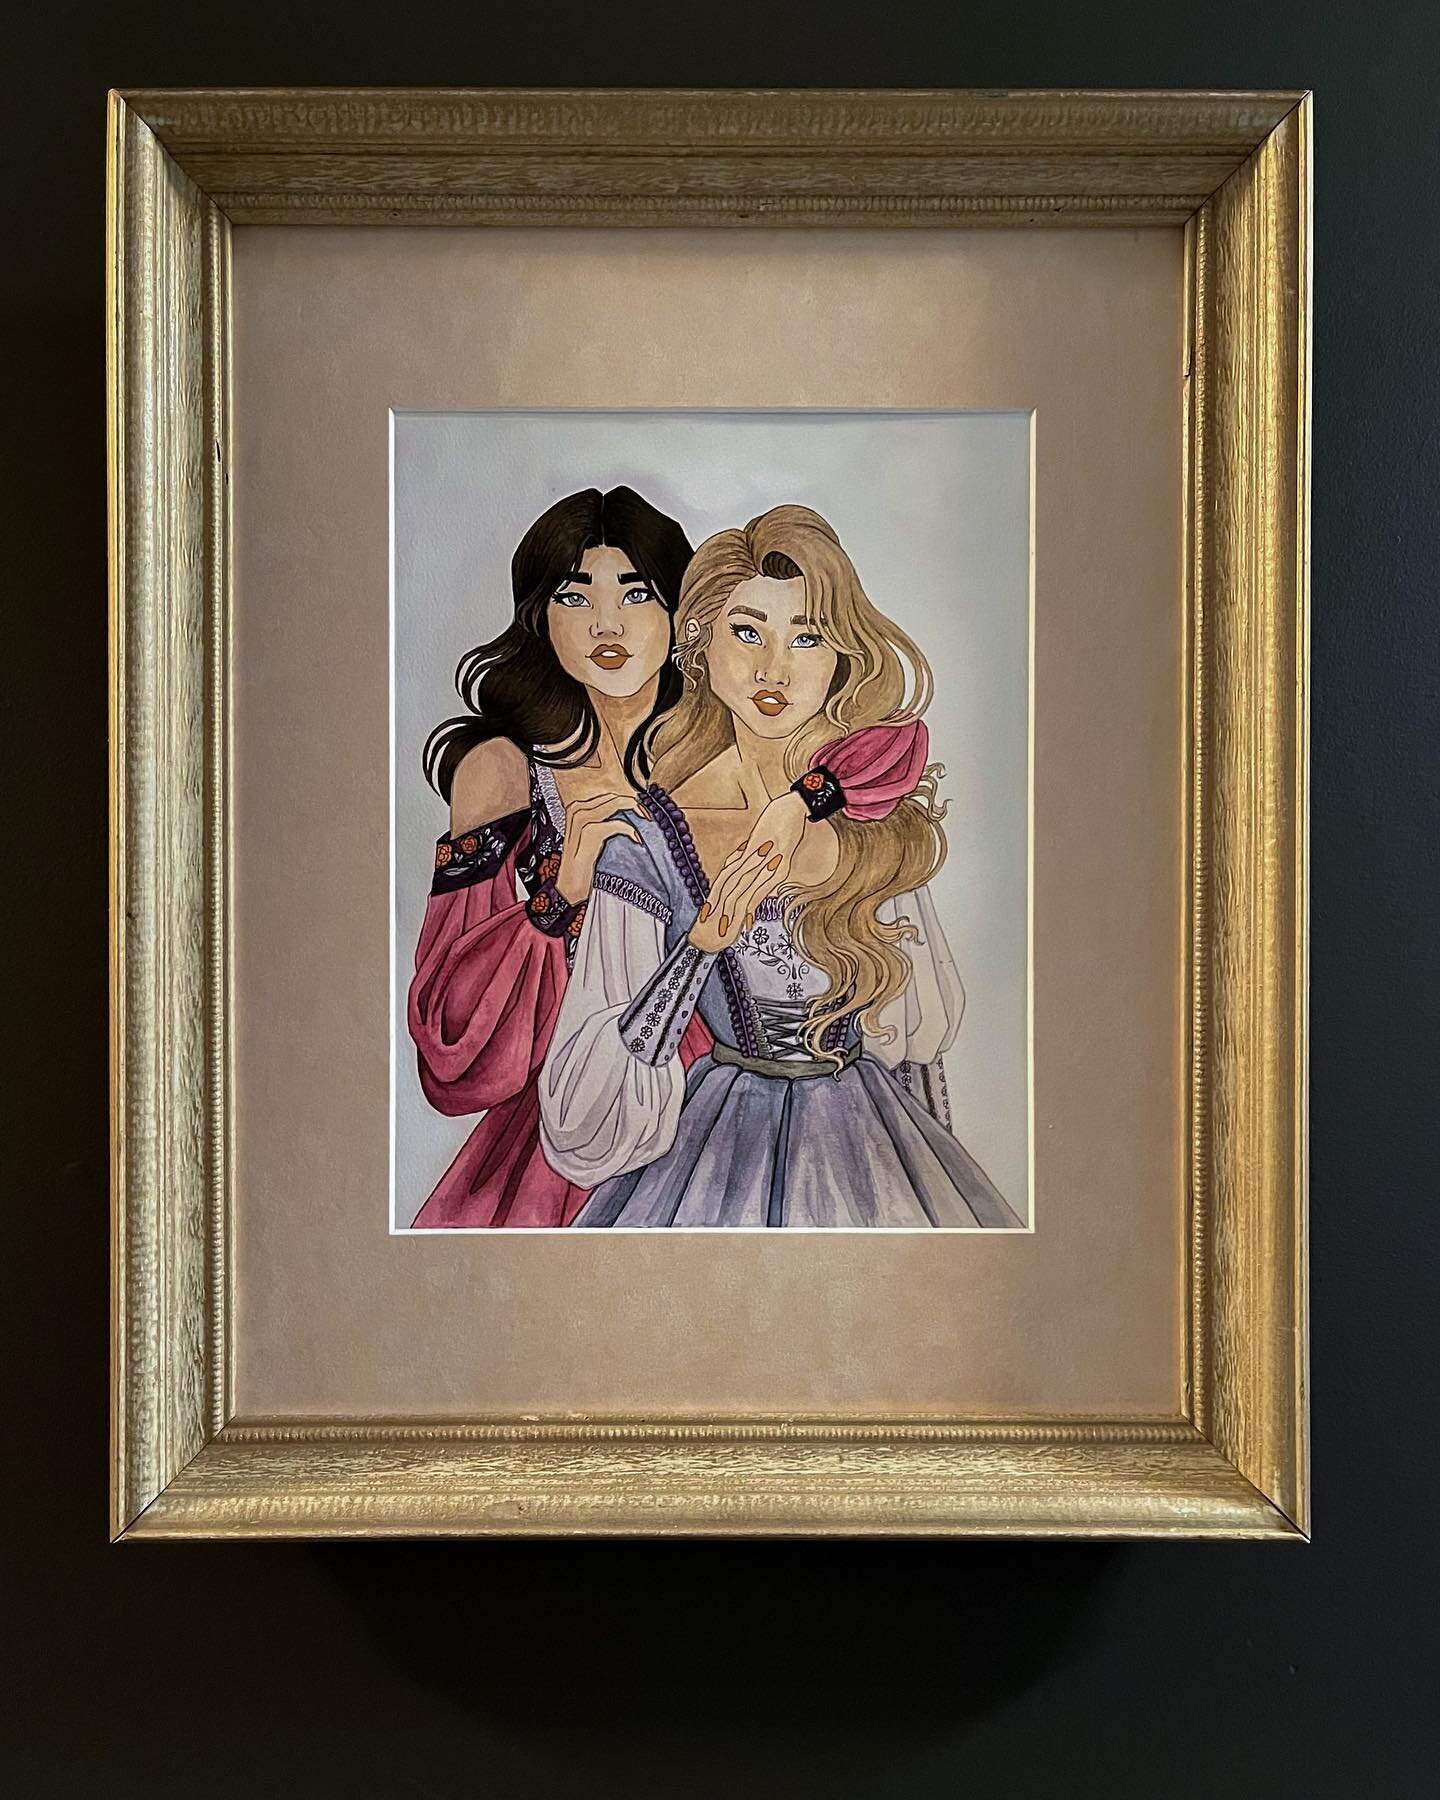 Custom framing of a 8x10 print of Snow White + Rose Red. They look stunning with the pastel colours and antique wood frame. 🤍❤️
#minuettetaylor #artprint #collector